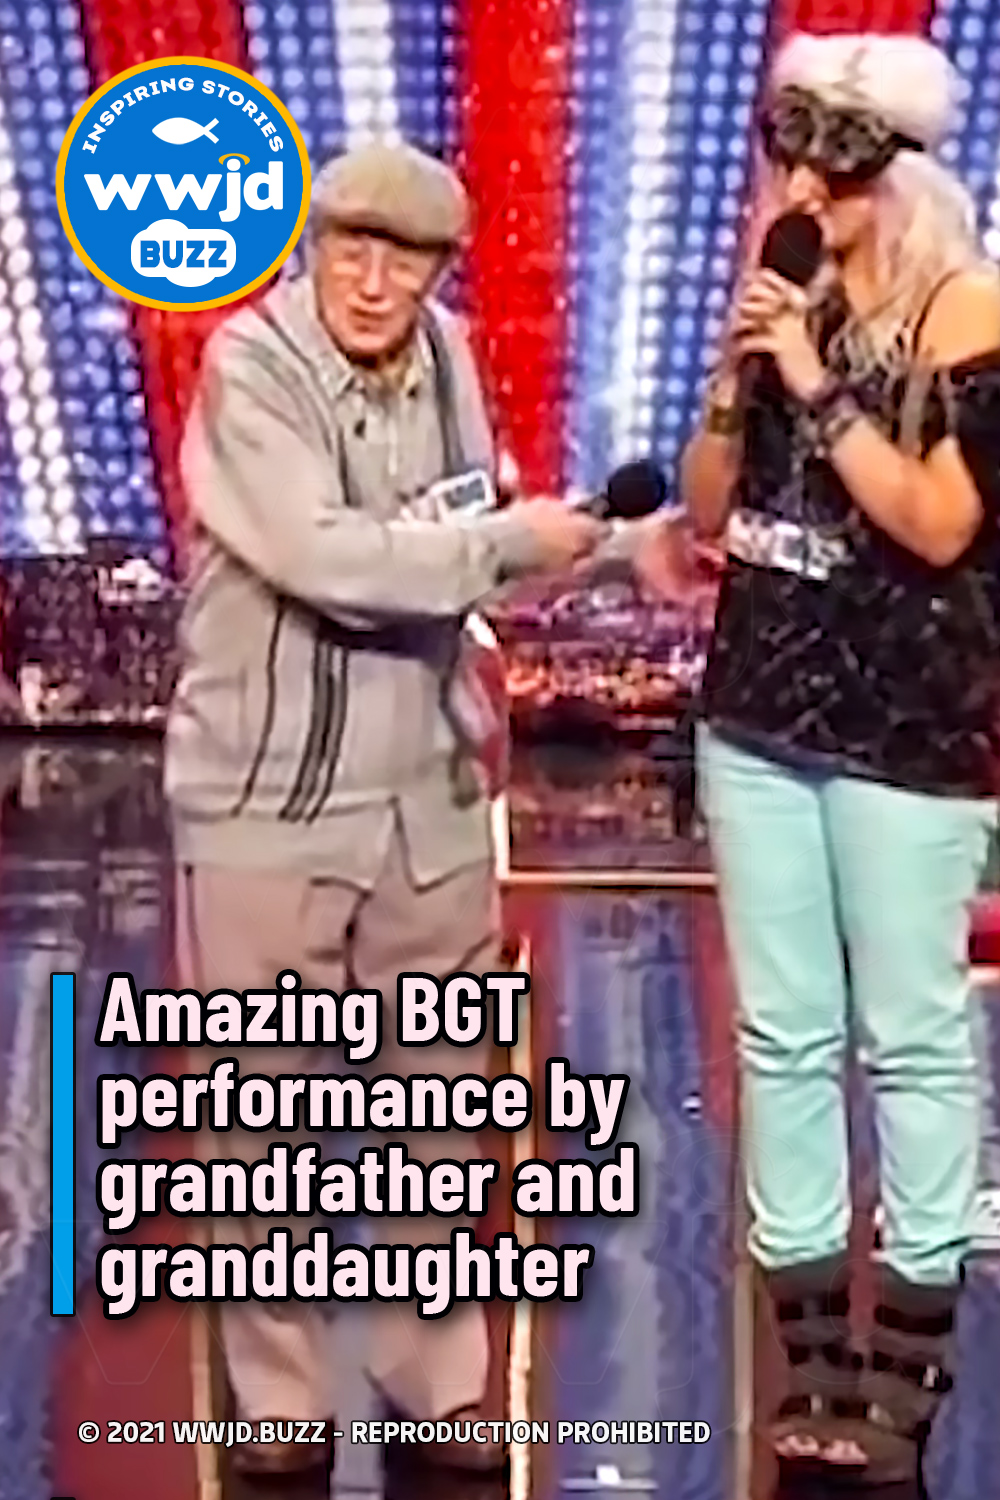 Amazing BGT performance by grandfather and granddaughter